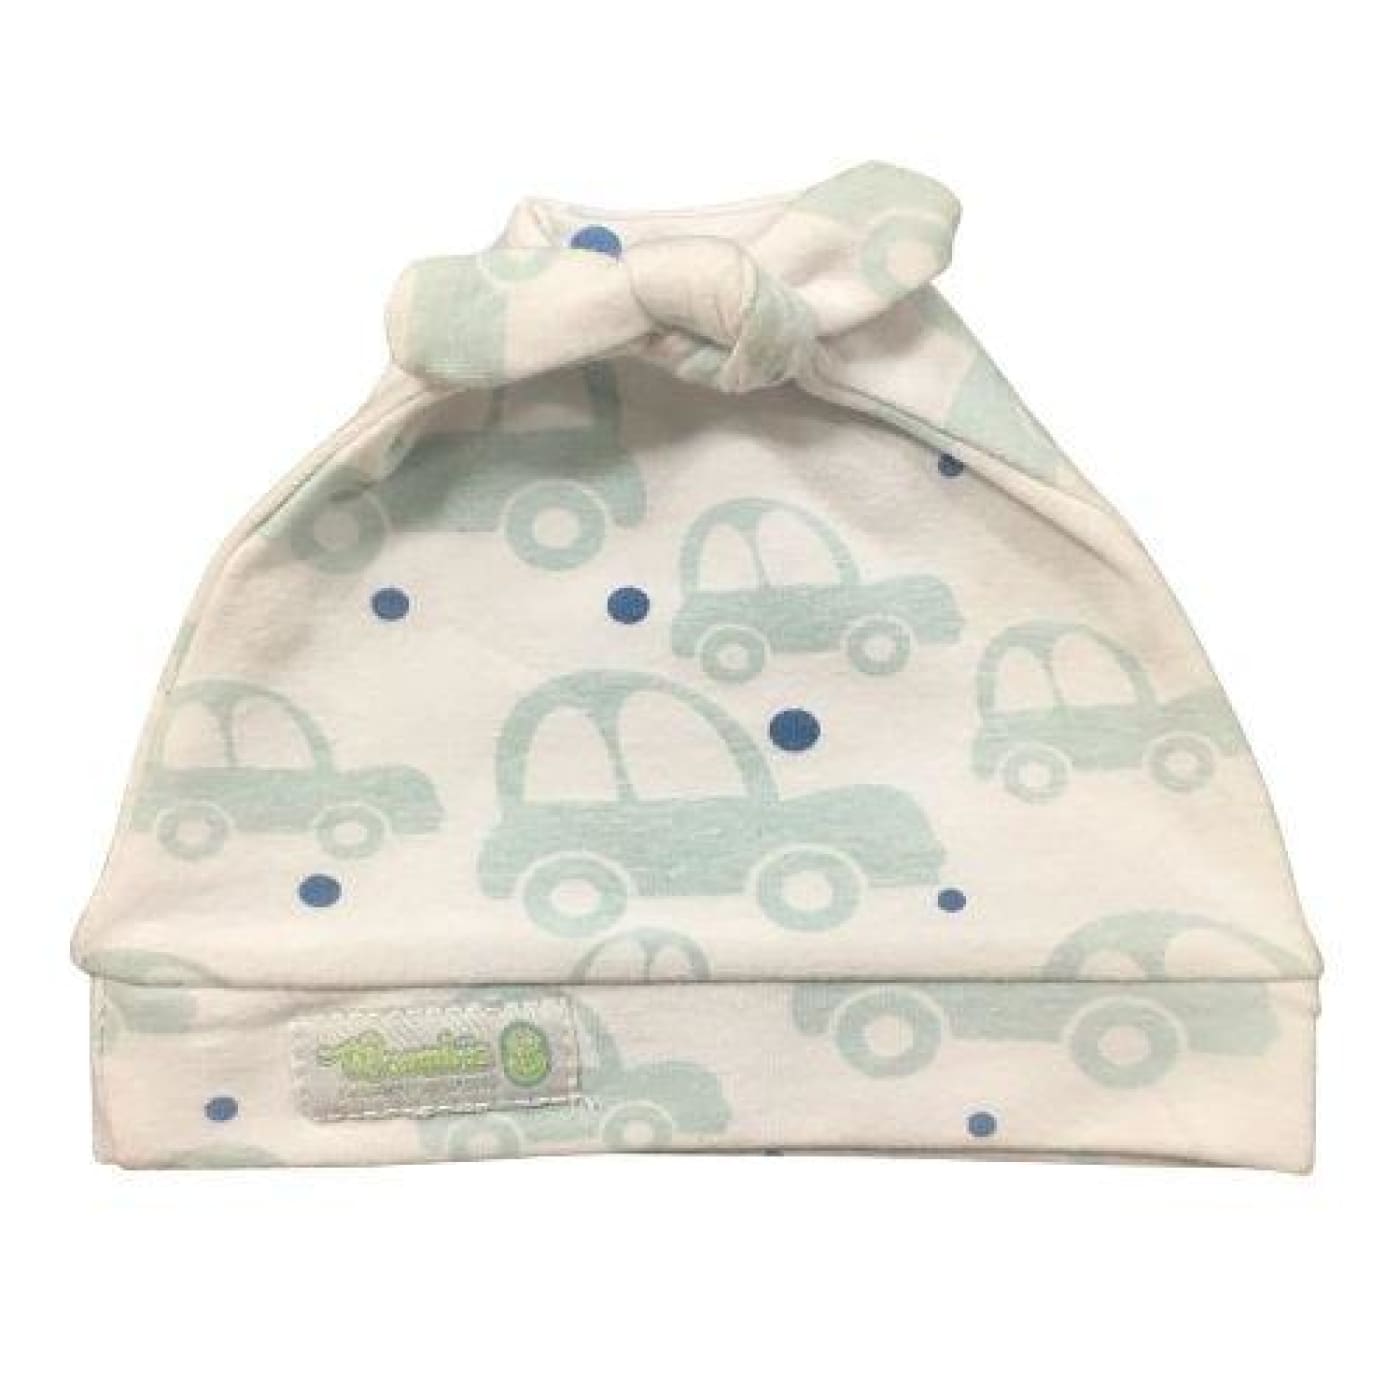 Woombie Cotton Beanie Little Cars 0-6M - 0-6m / Little Cars - BABY & TODDLER CLOTHING - BEANIES/HATS